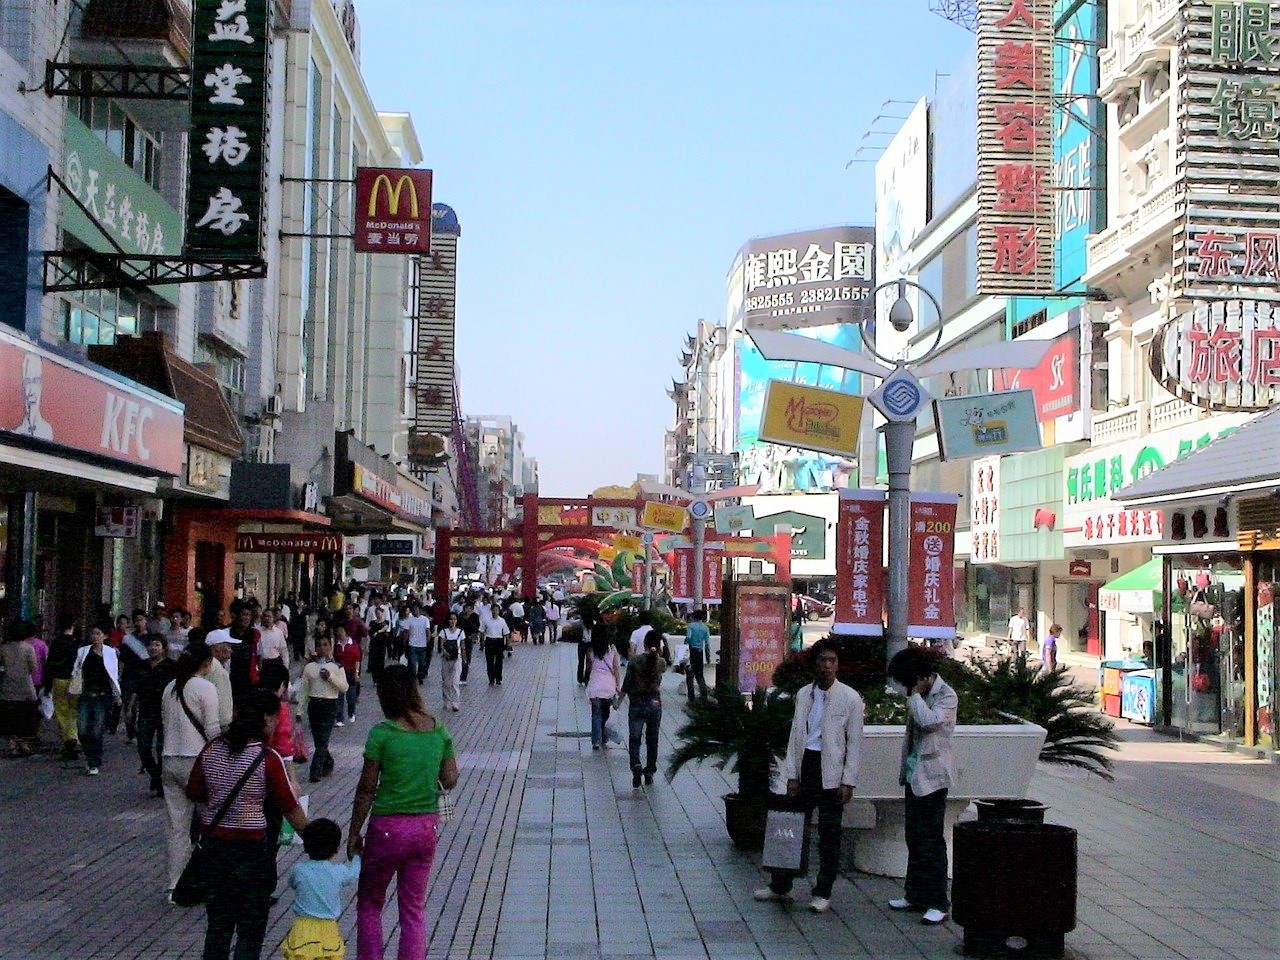 Read more about the article 在城市 Zài chéngshì: Around Town in Chinese